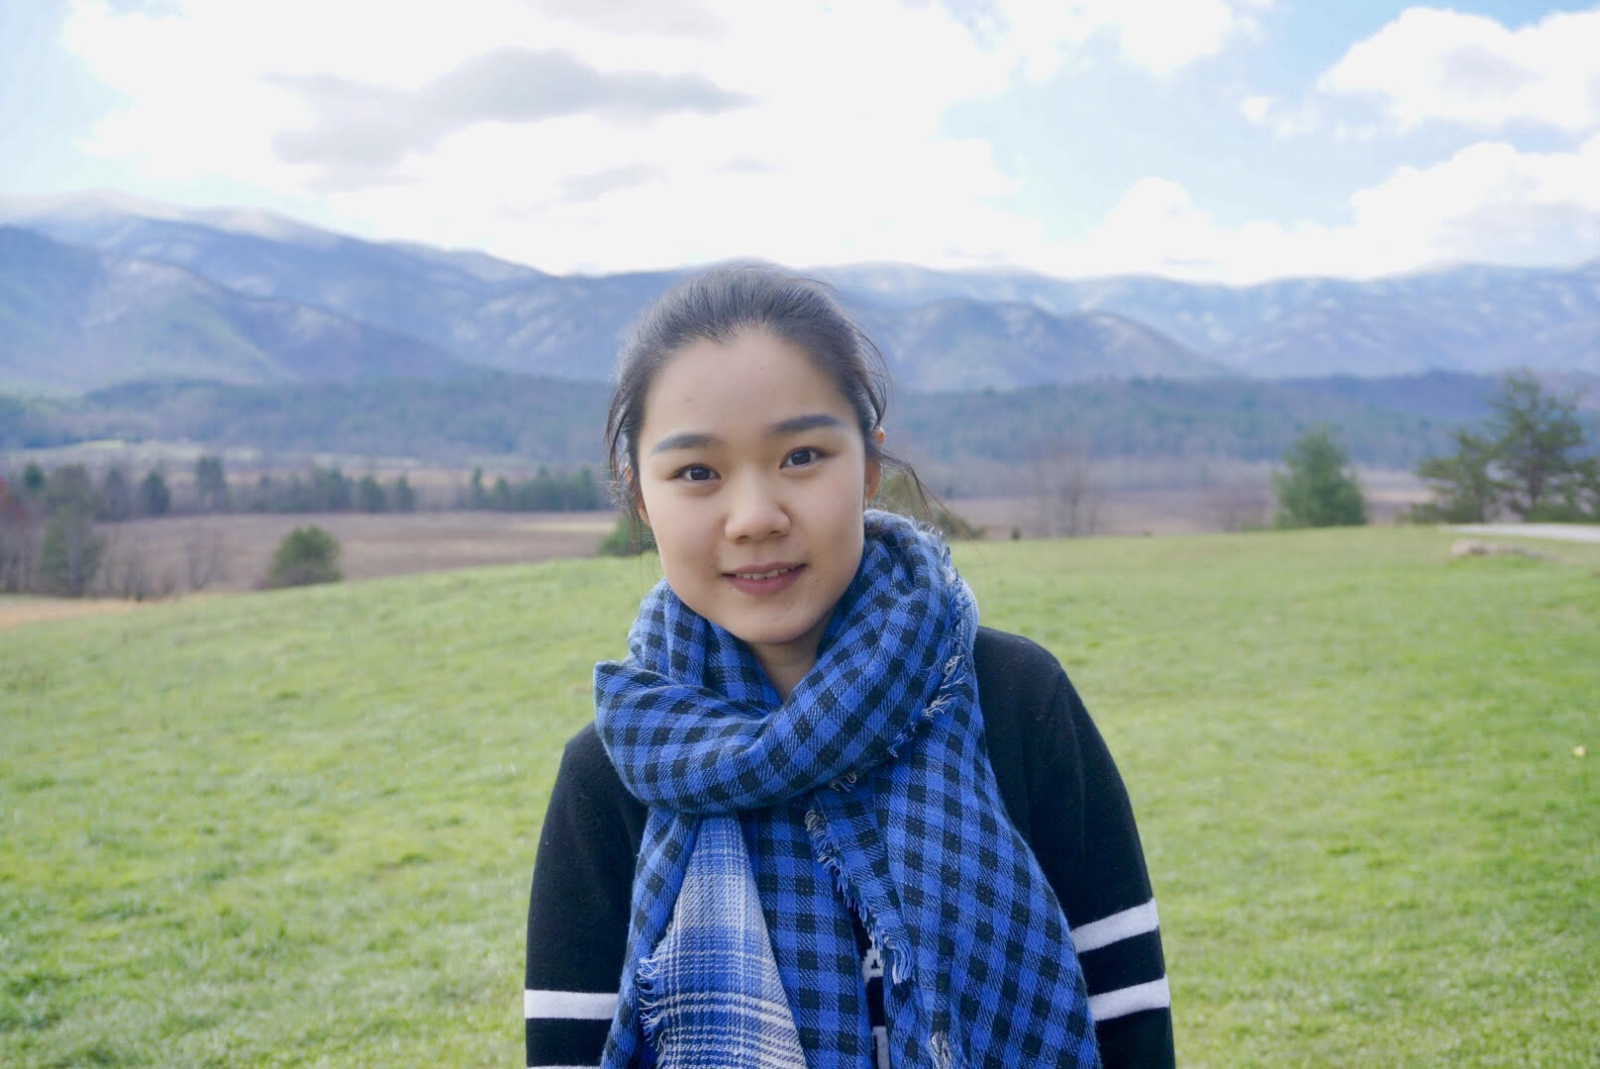 A woman wearing a blue checkered scarf stands, smiling in front of a backdrop of green hills and mountains.